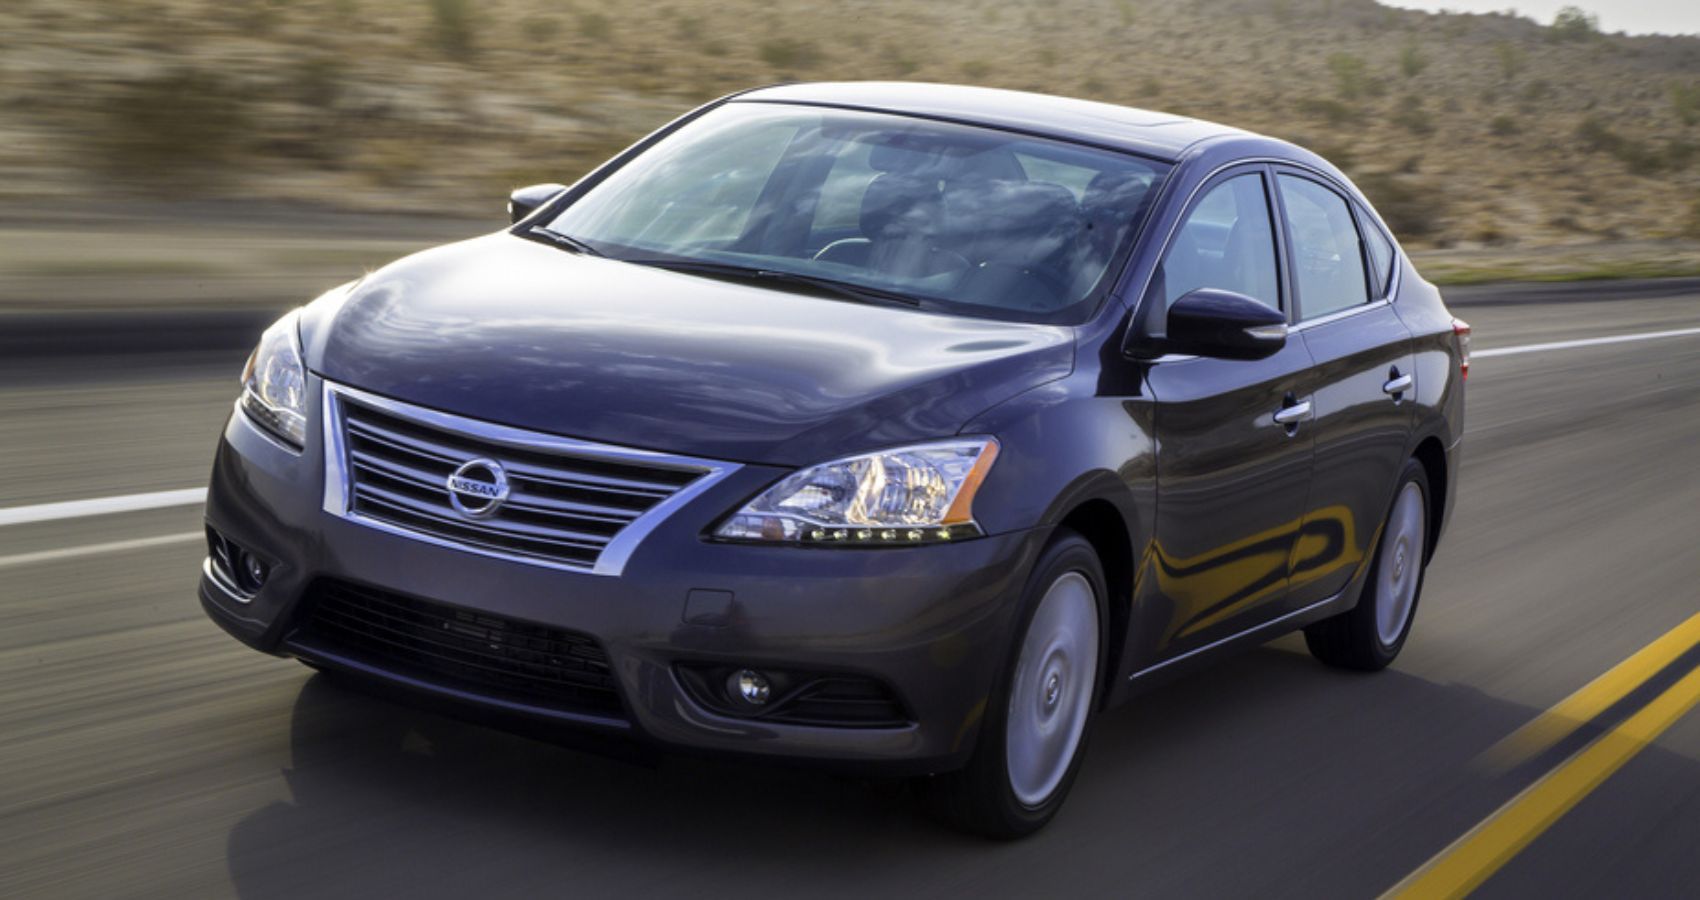 2013 Nissan Sentra Front View In Grey